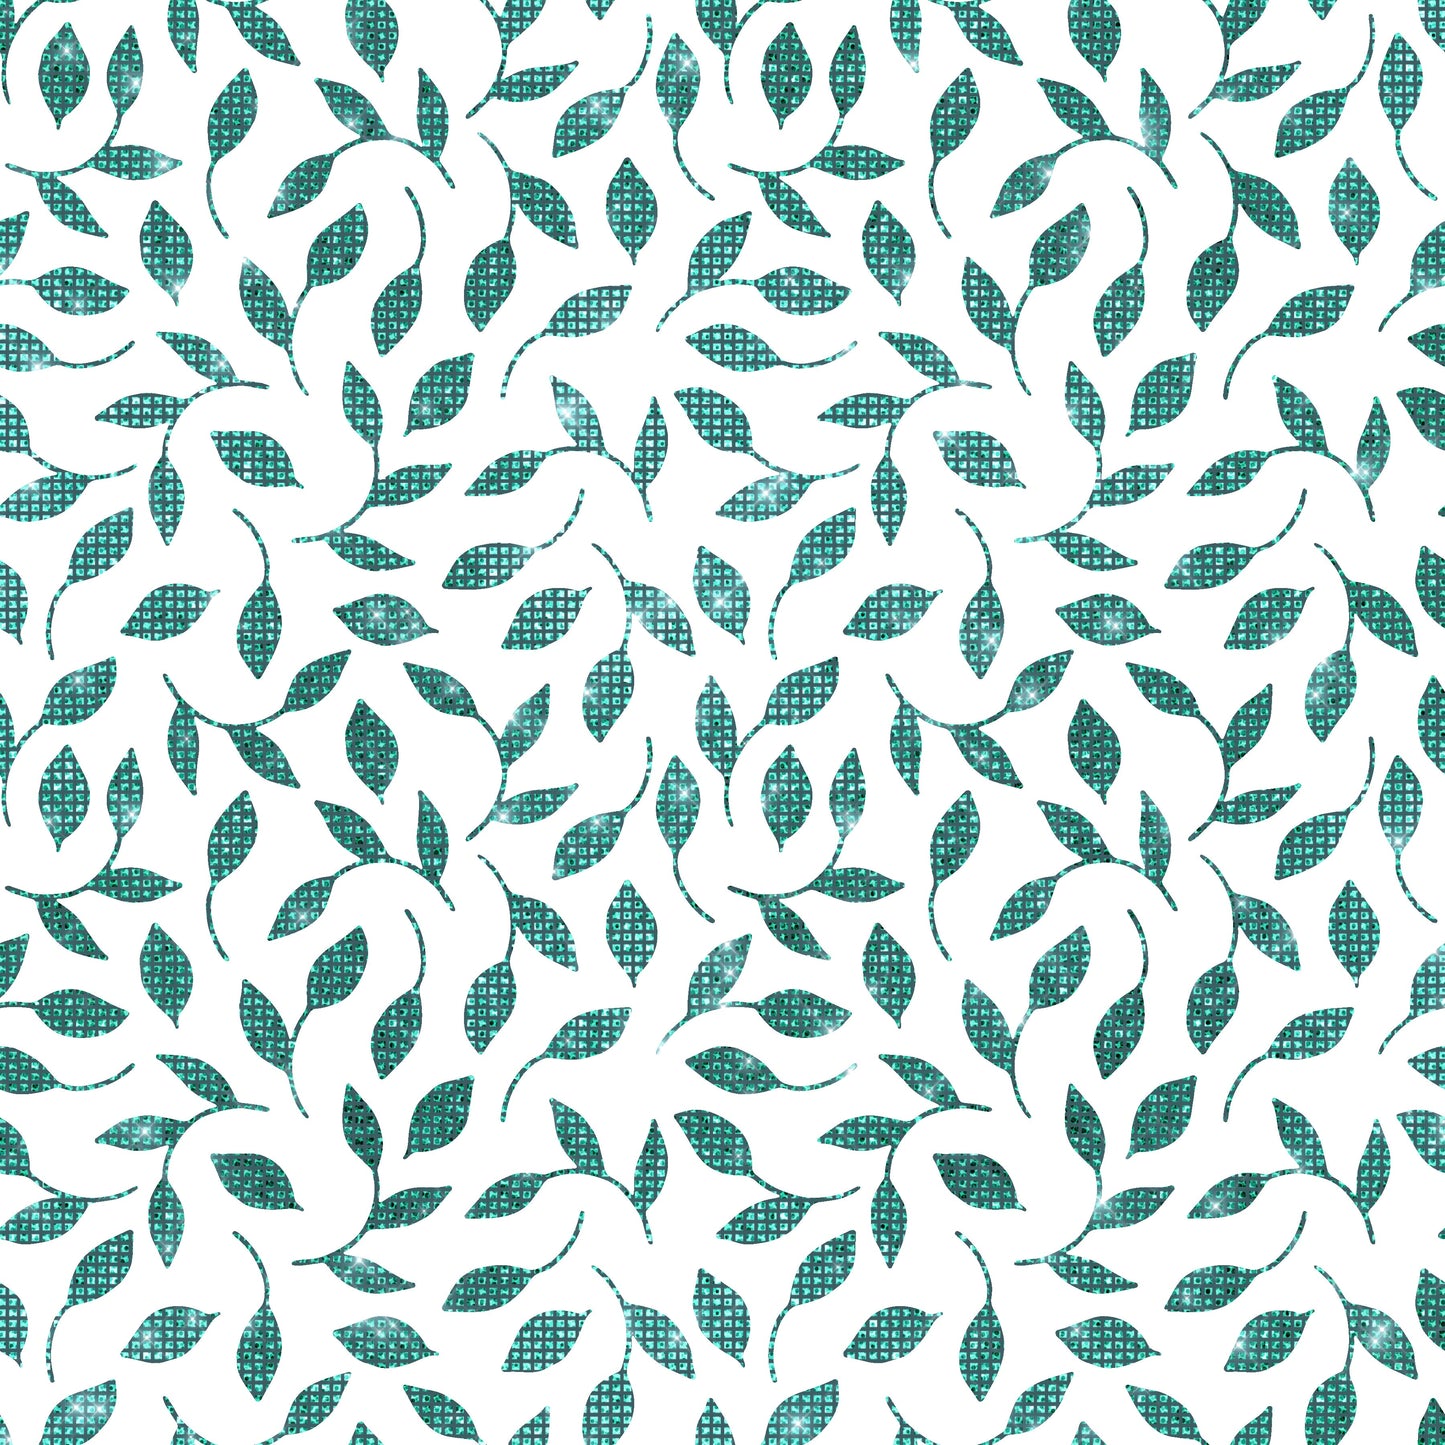 Teal Vines (Faux Leather - 8" x 13" Printed Sheet)